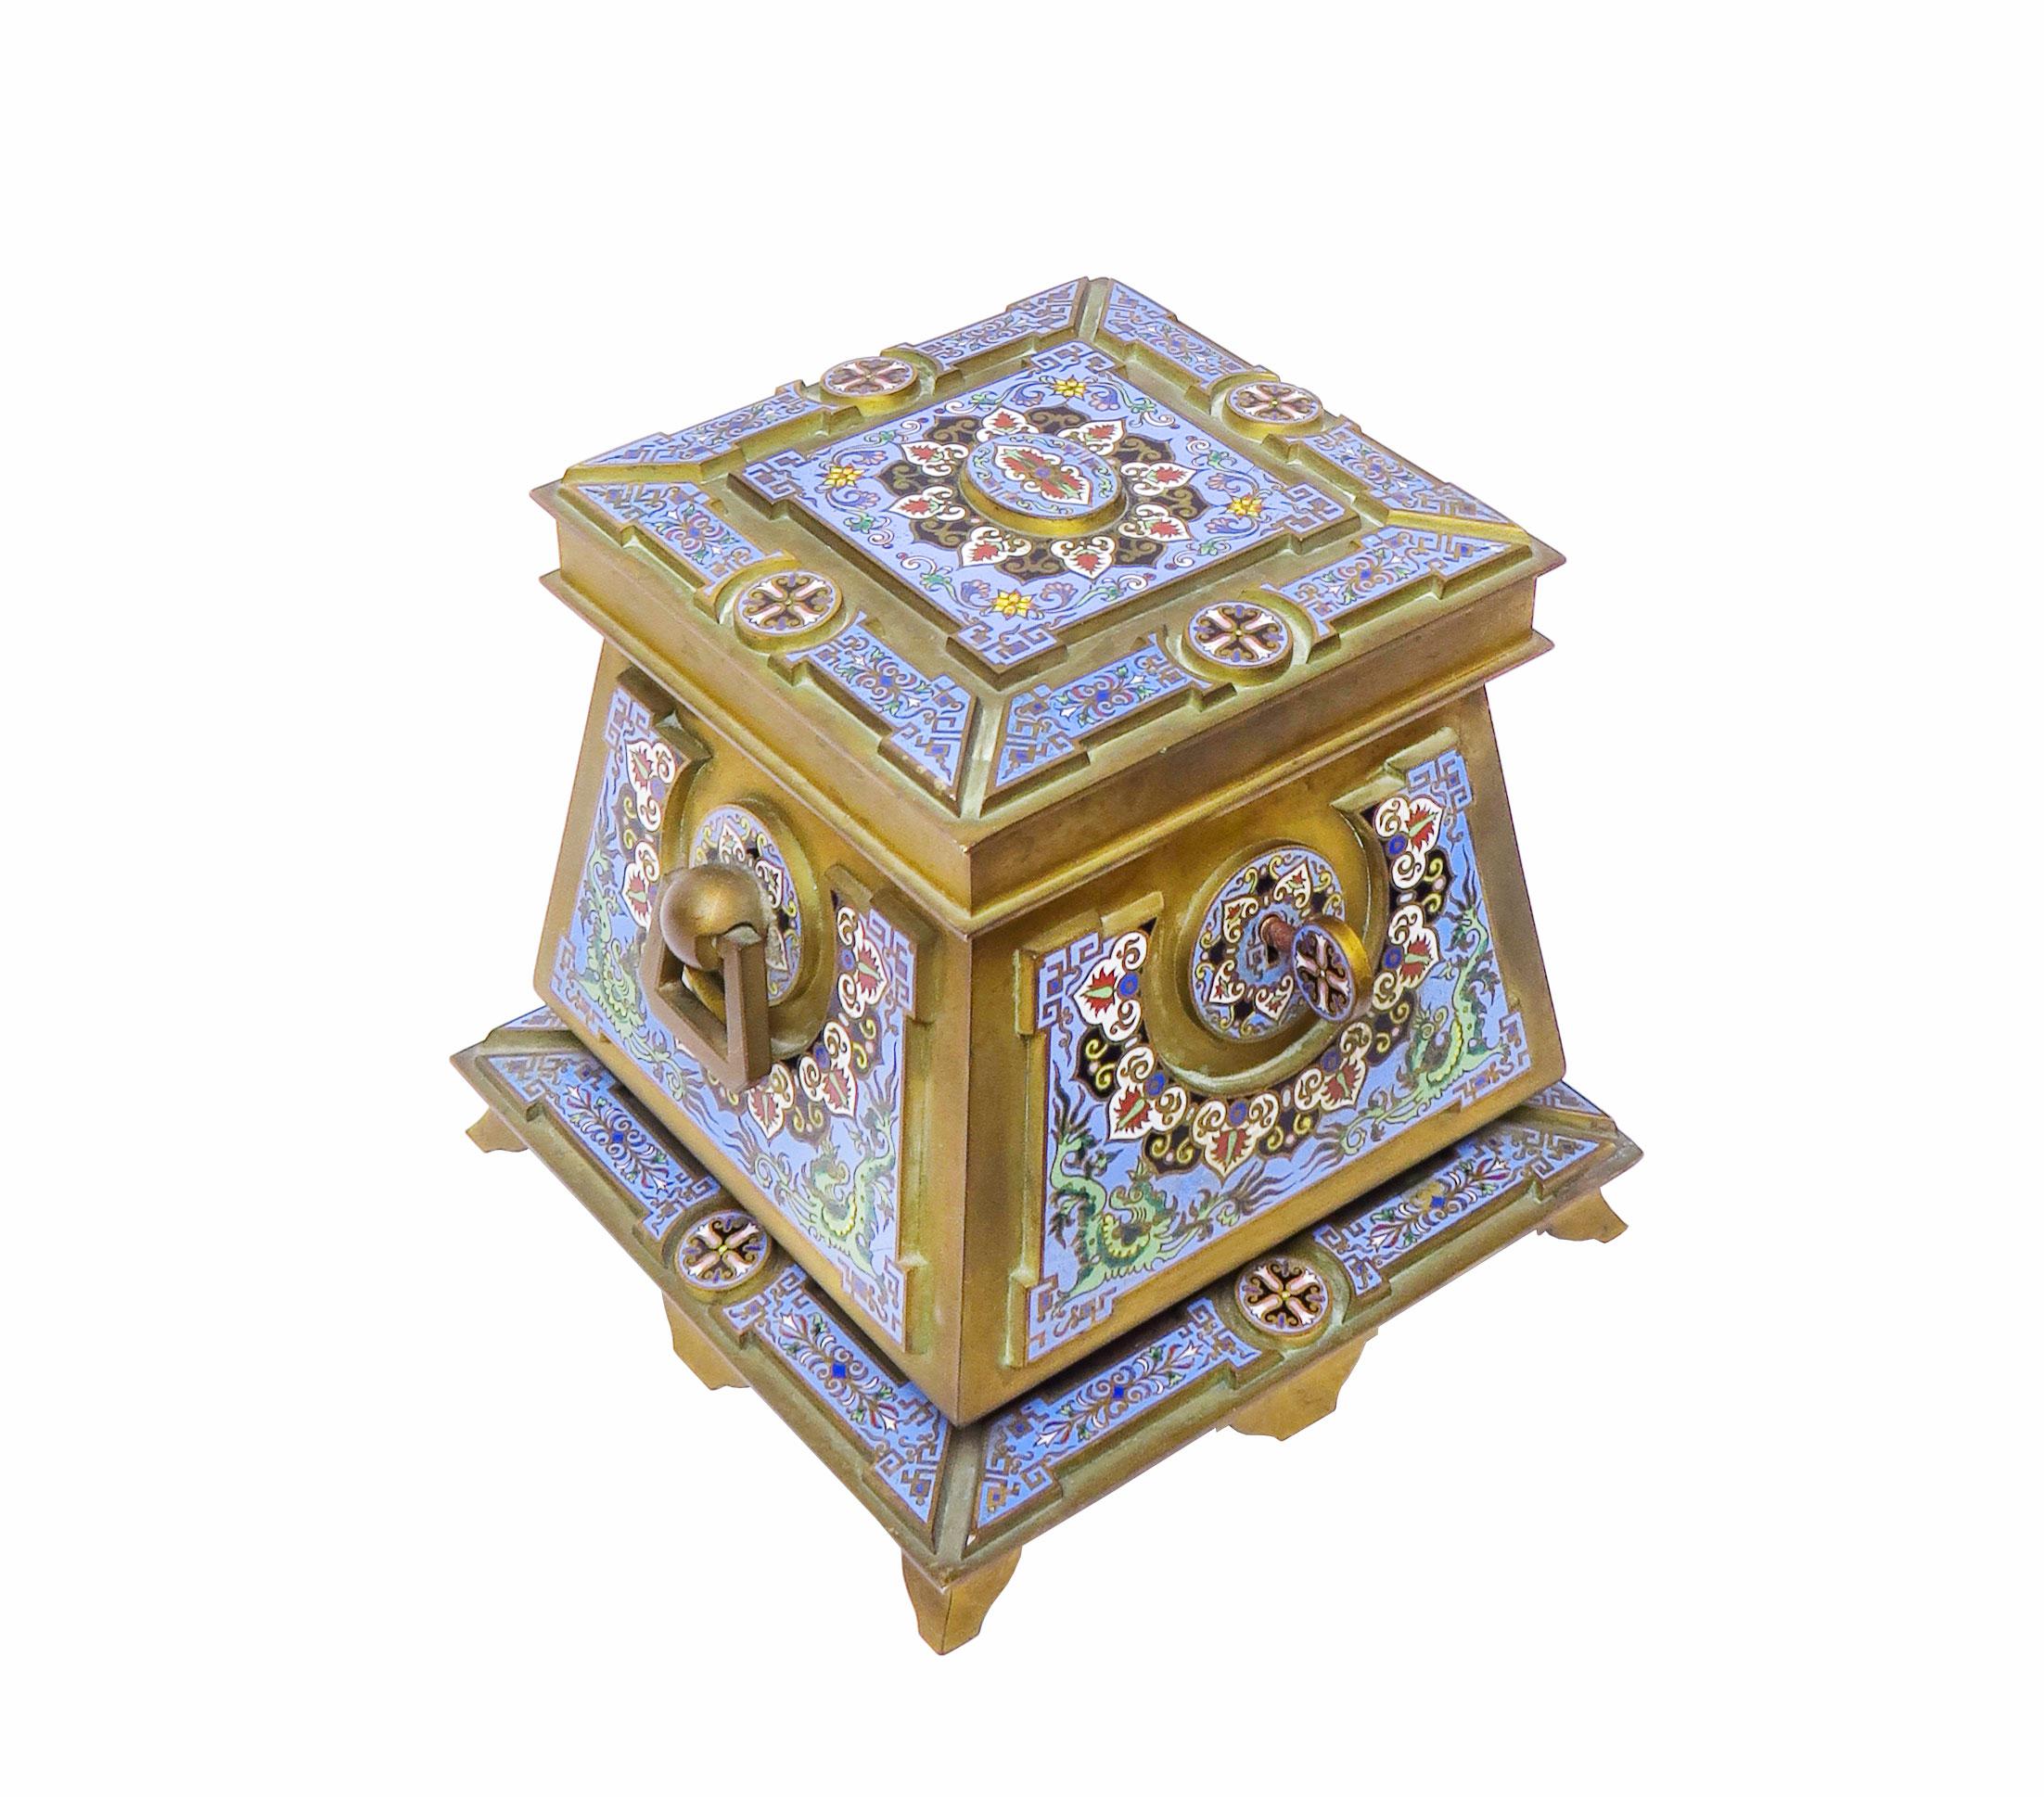 Cast French Gilt-Bronze and Cloisonne Enamel Casket Possibly by Ferdinand Barbedienne